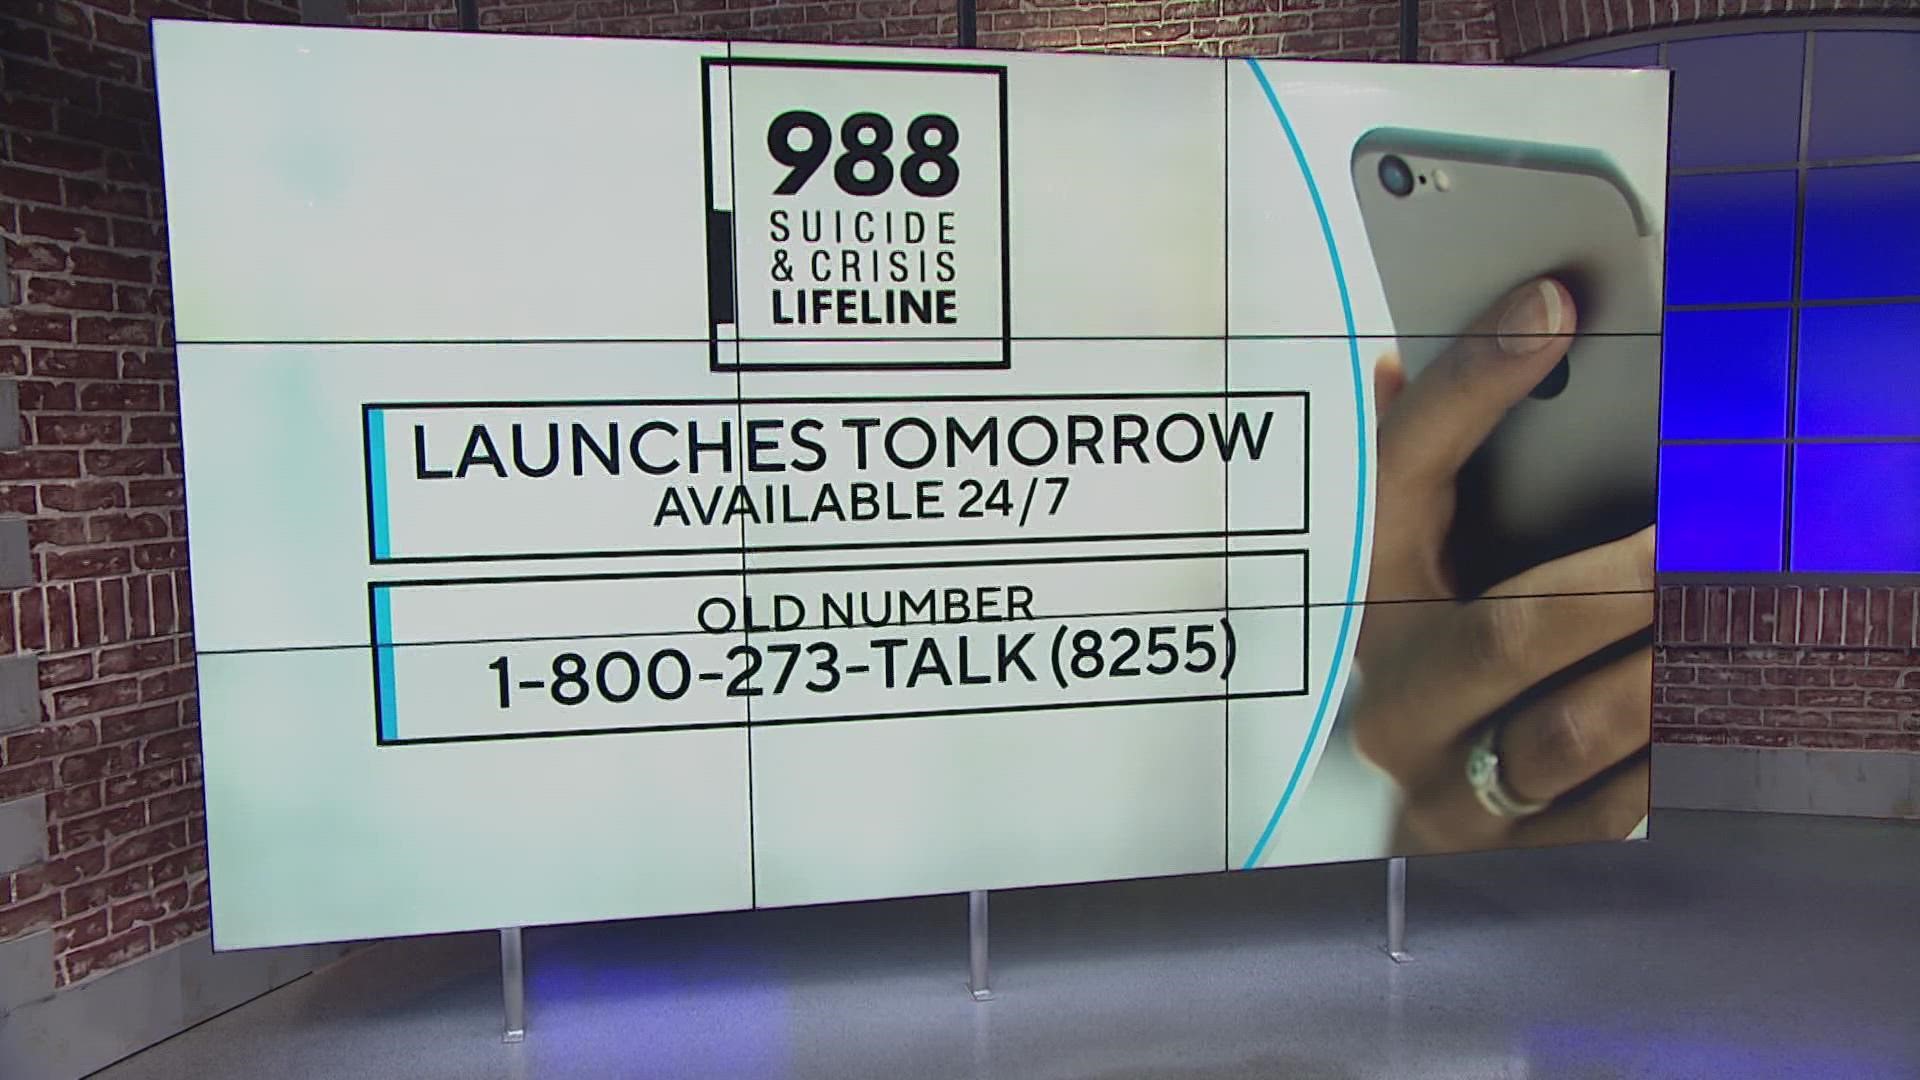 If you or someone you love was in crisis or contemplating suicide -- would you know the number to call?